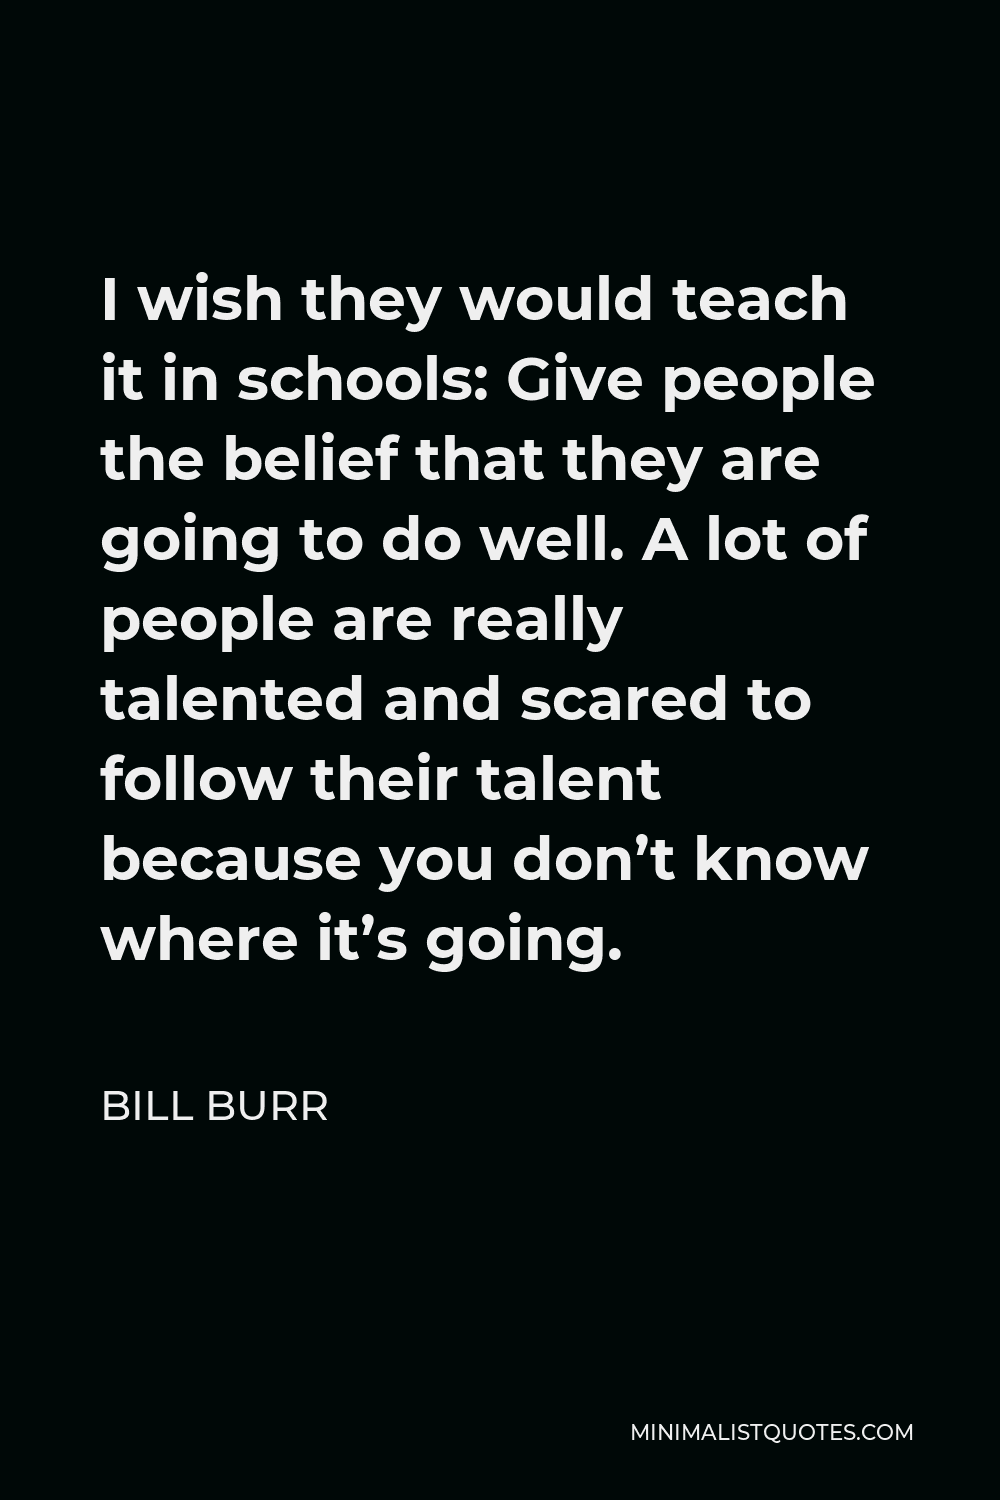 Bill Burr Quote - I wish they would teach it in schools: Give people the belief that they are going to do well. A lot of people are really talented and scared to follow their talent because you don’t know where it’s going.